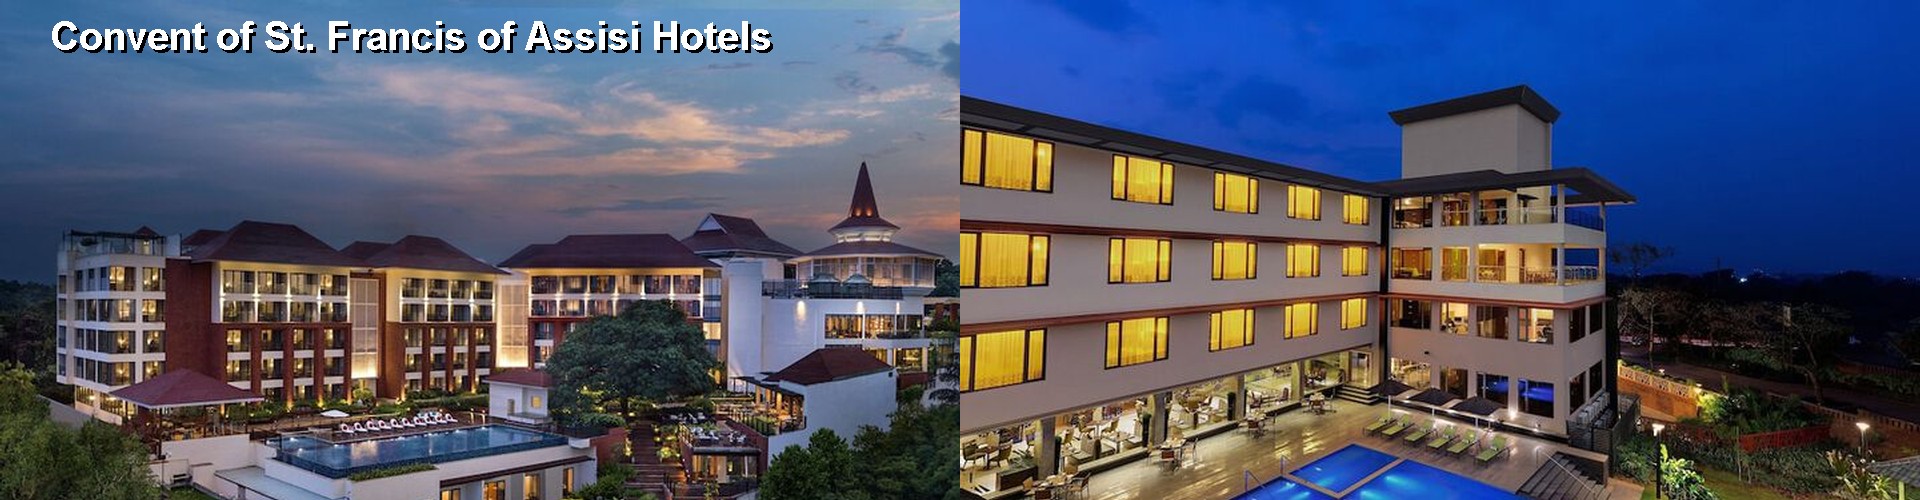 4 Best Hotels near Convent of St. Francis of Assisi